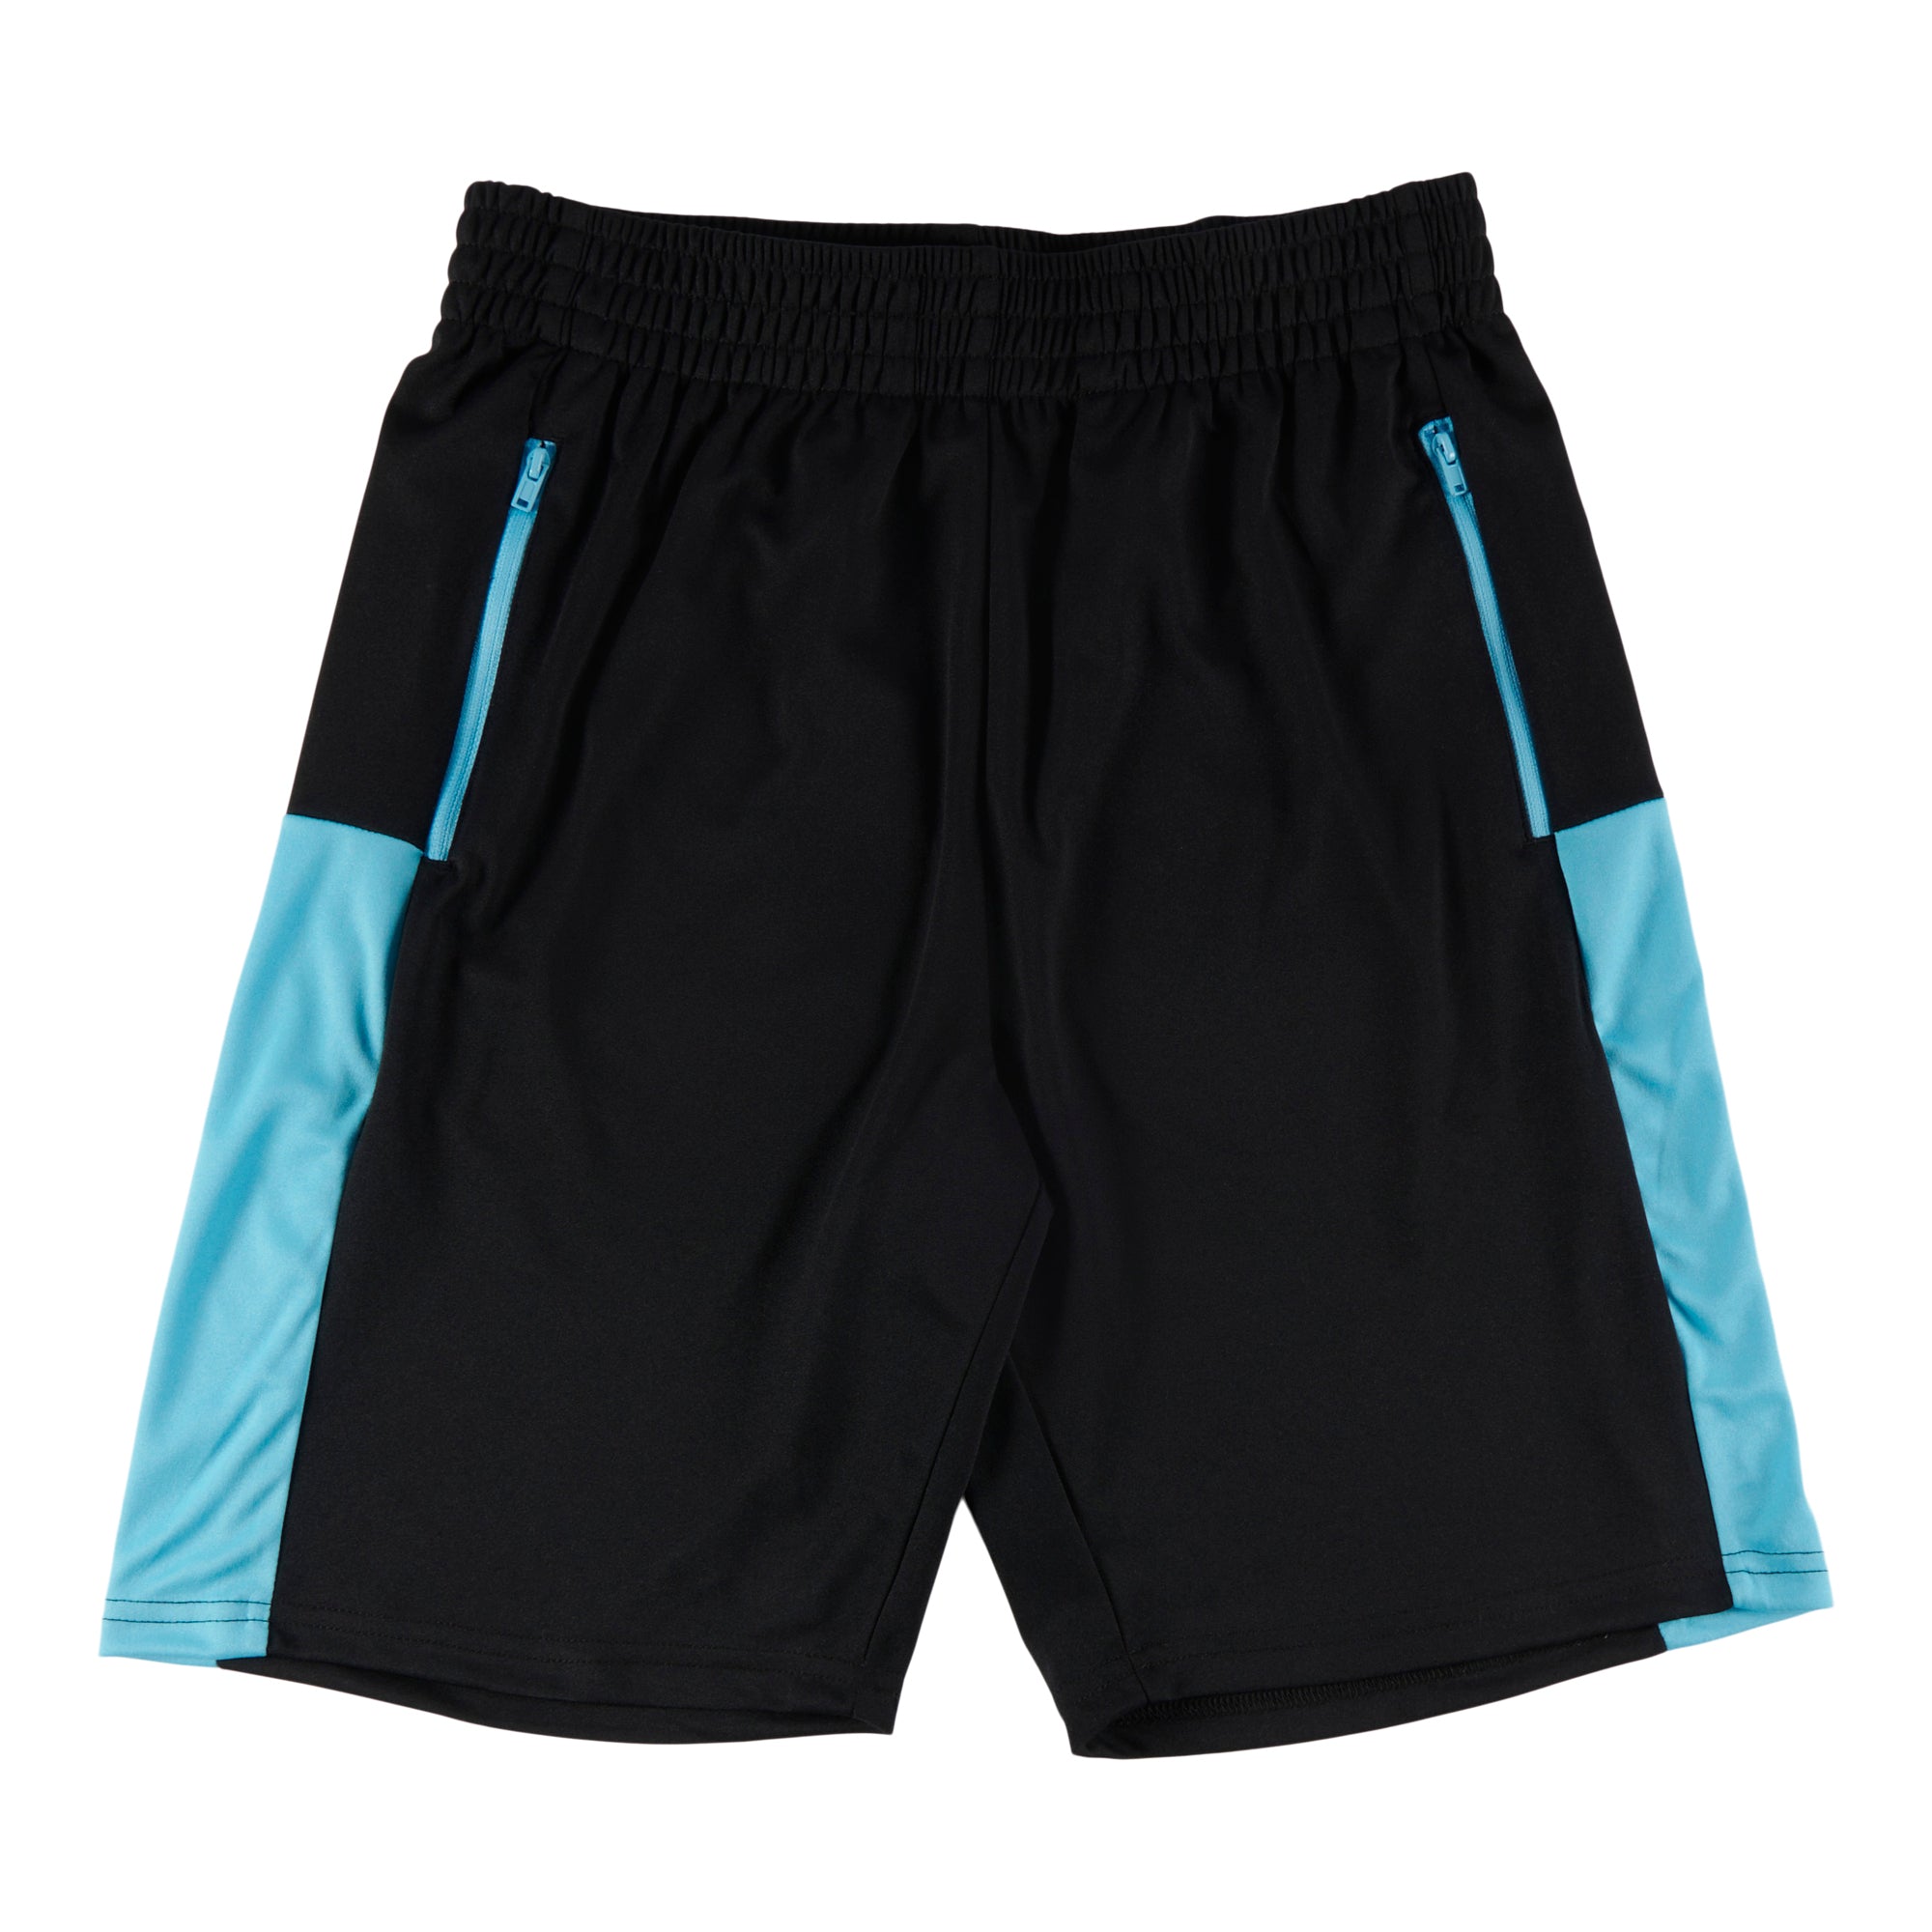 ACX Active Men's Training Shorts with Adjustable Drawstring